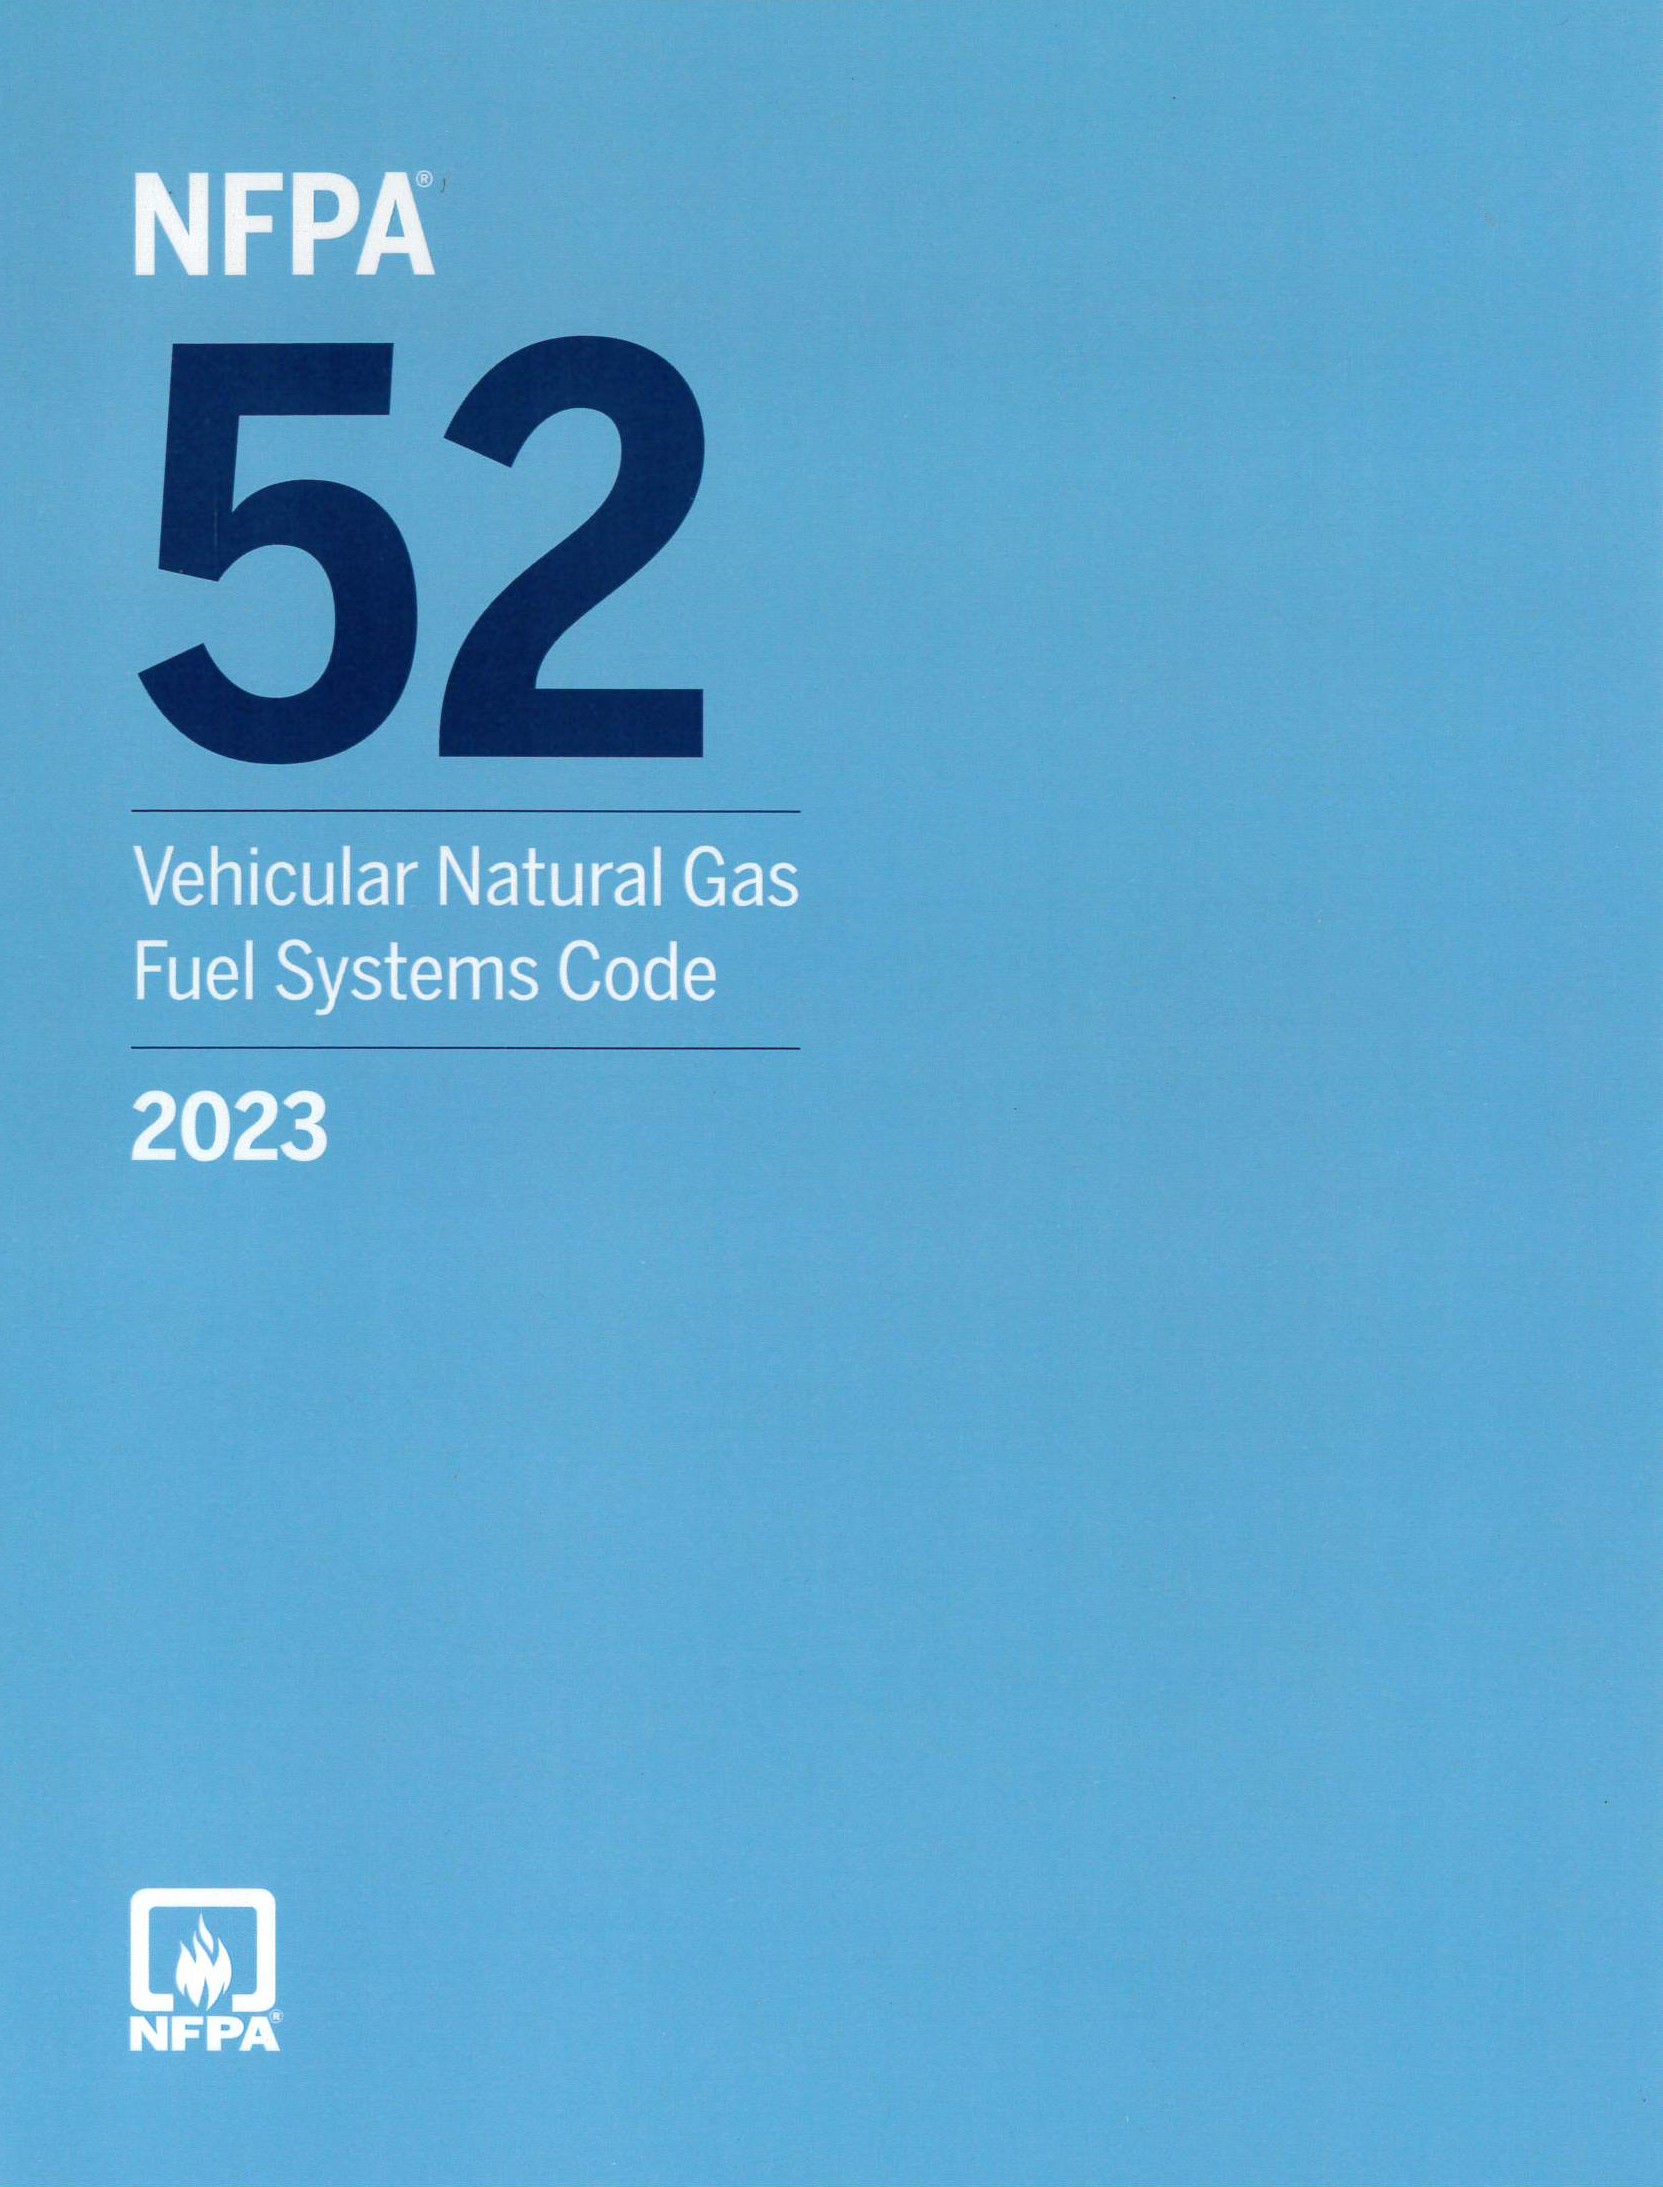 NFPA 52, Vehicular Natural Gas Fuel Systems Code 2023 ed.  